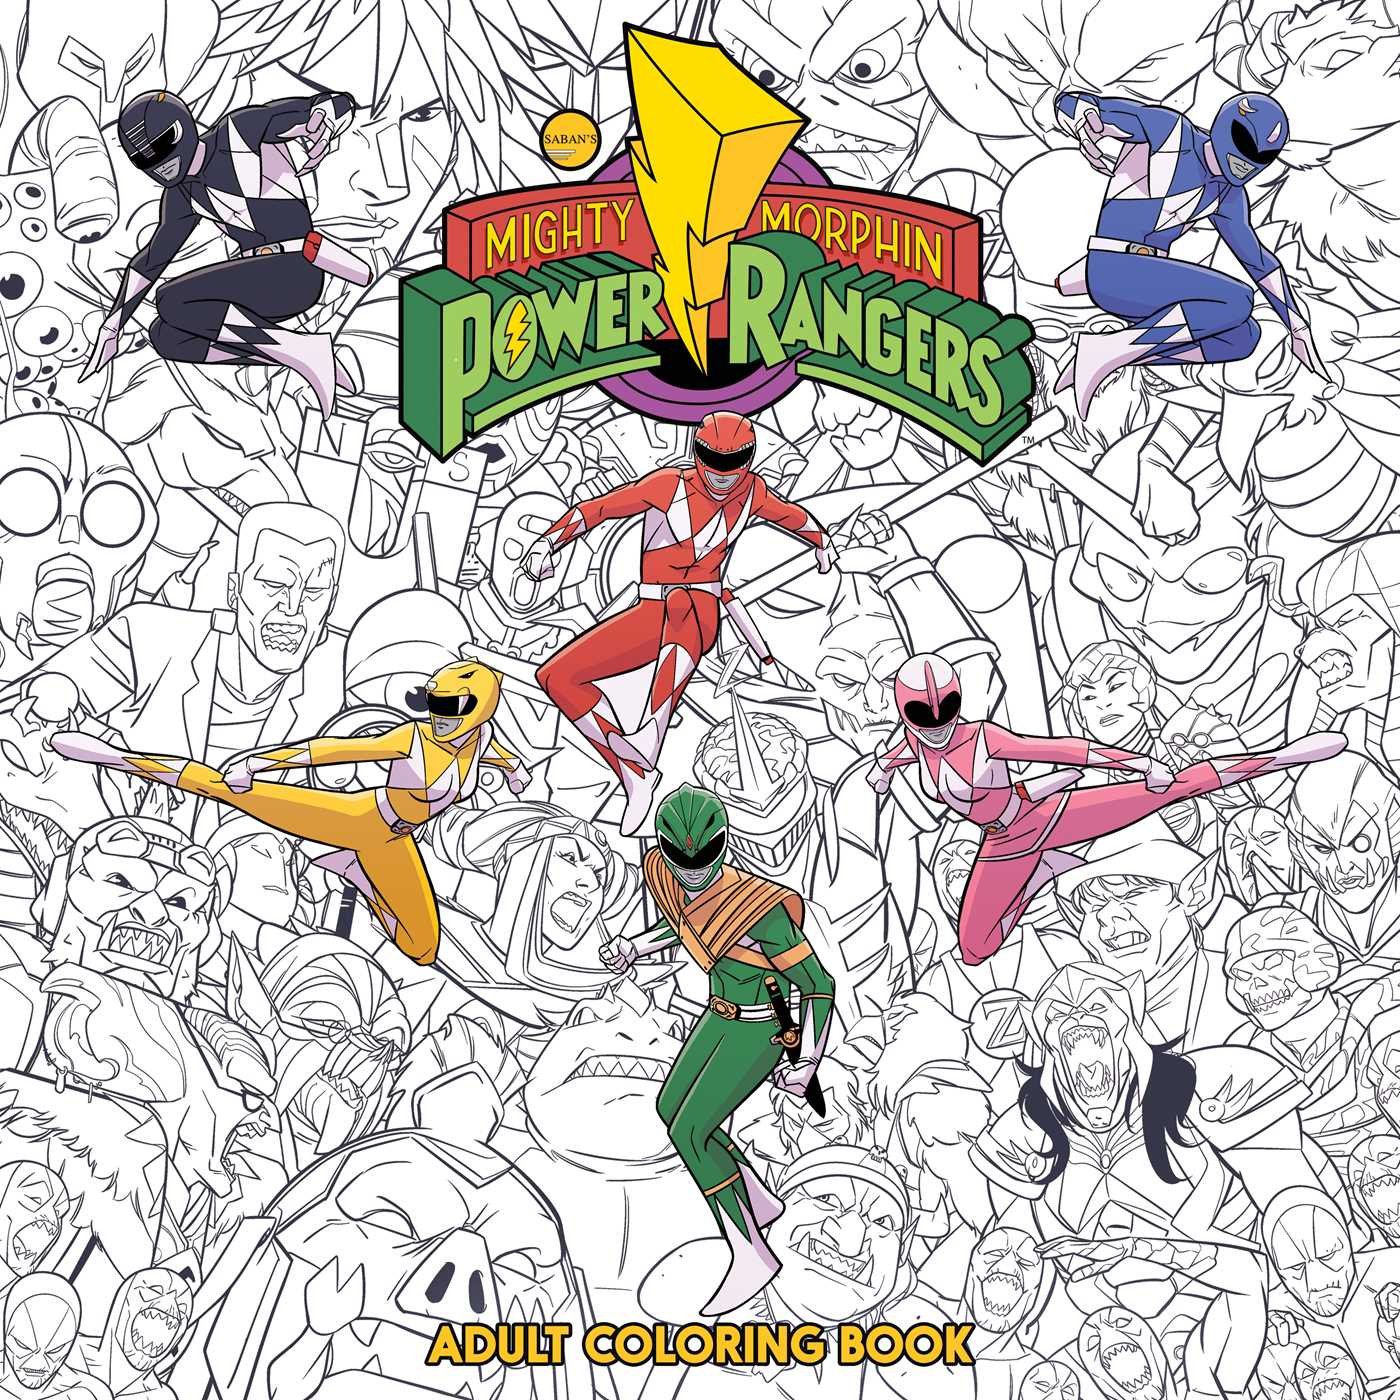 Download mighty-morphin-power-rangers-coloring-book - The Nifty Nerd